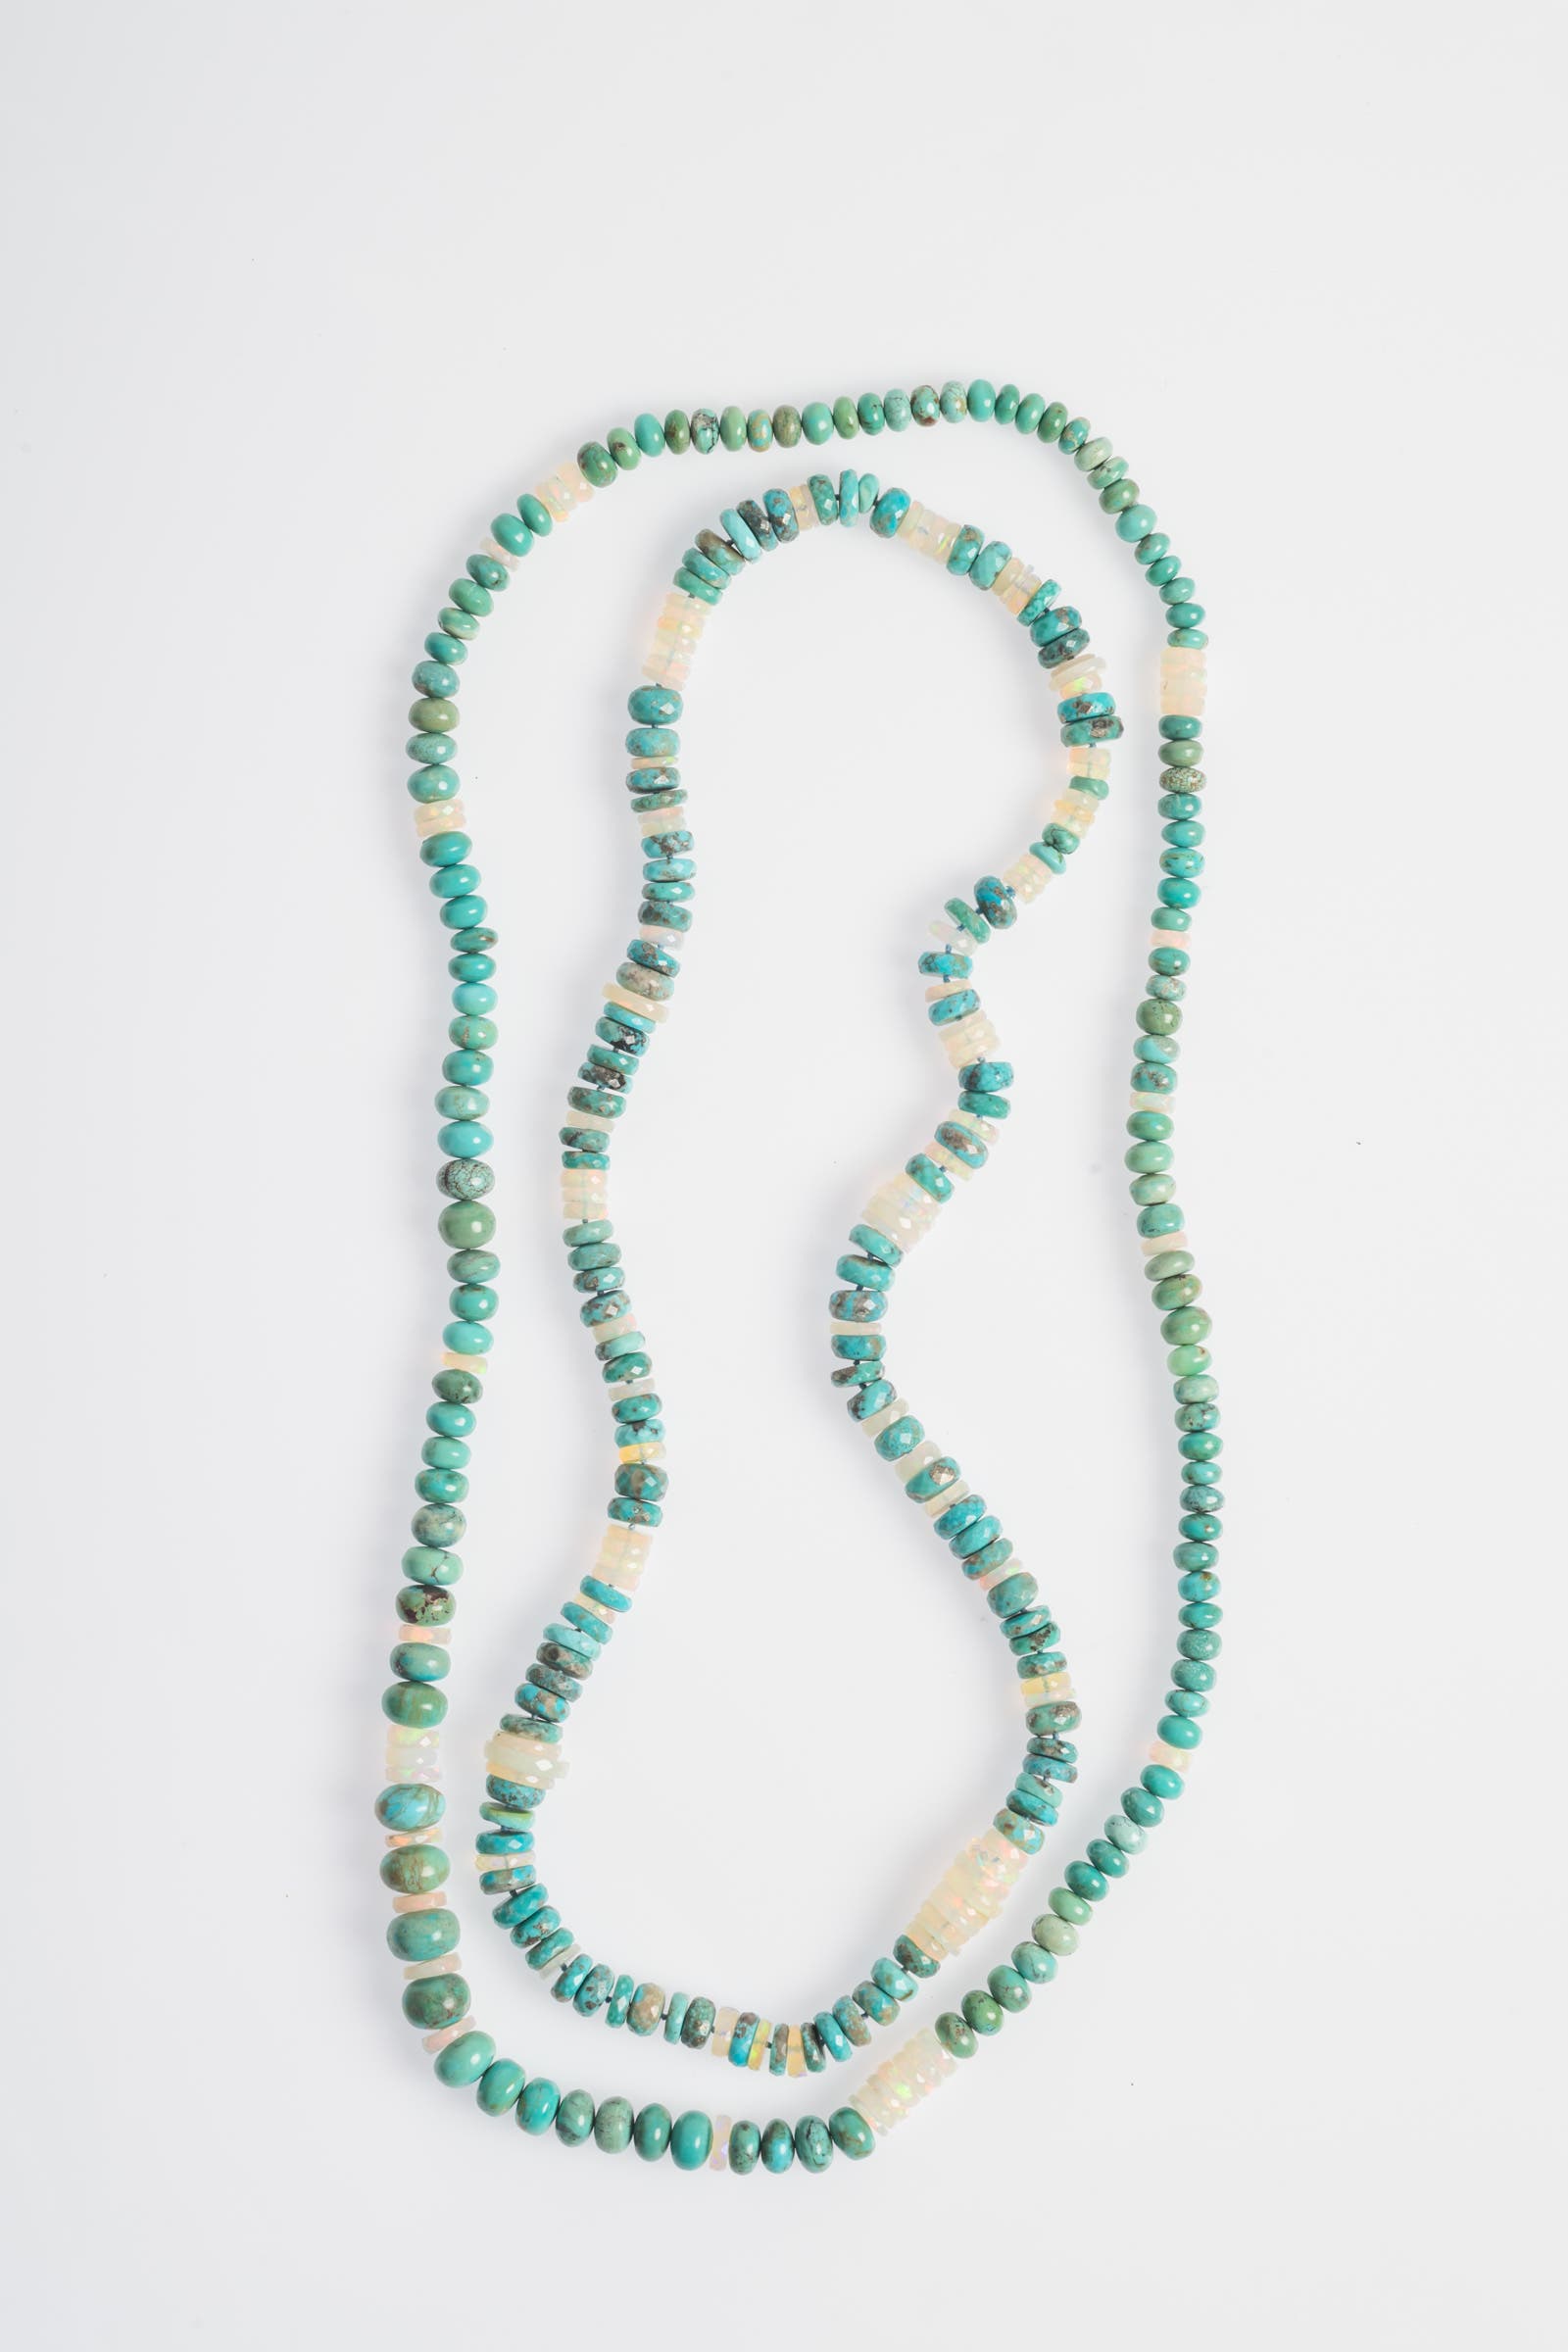 Turquoise and Opal Necklaces image